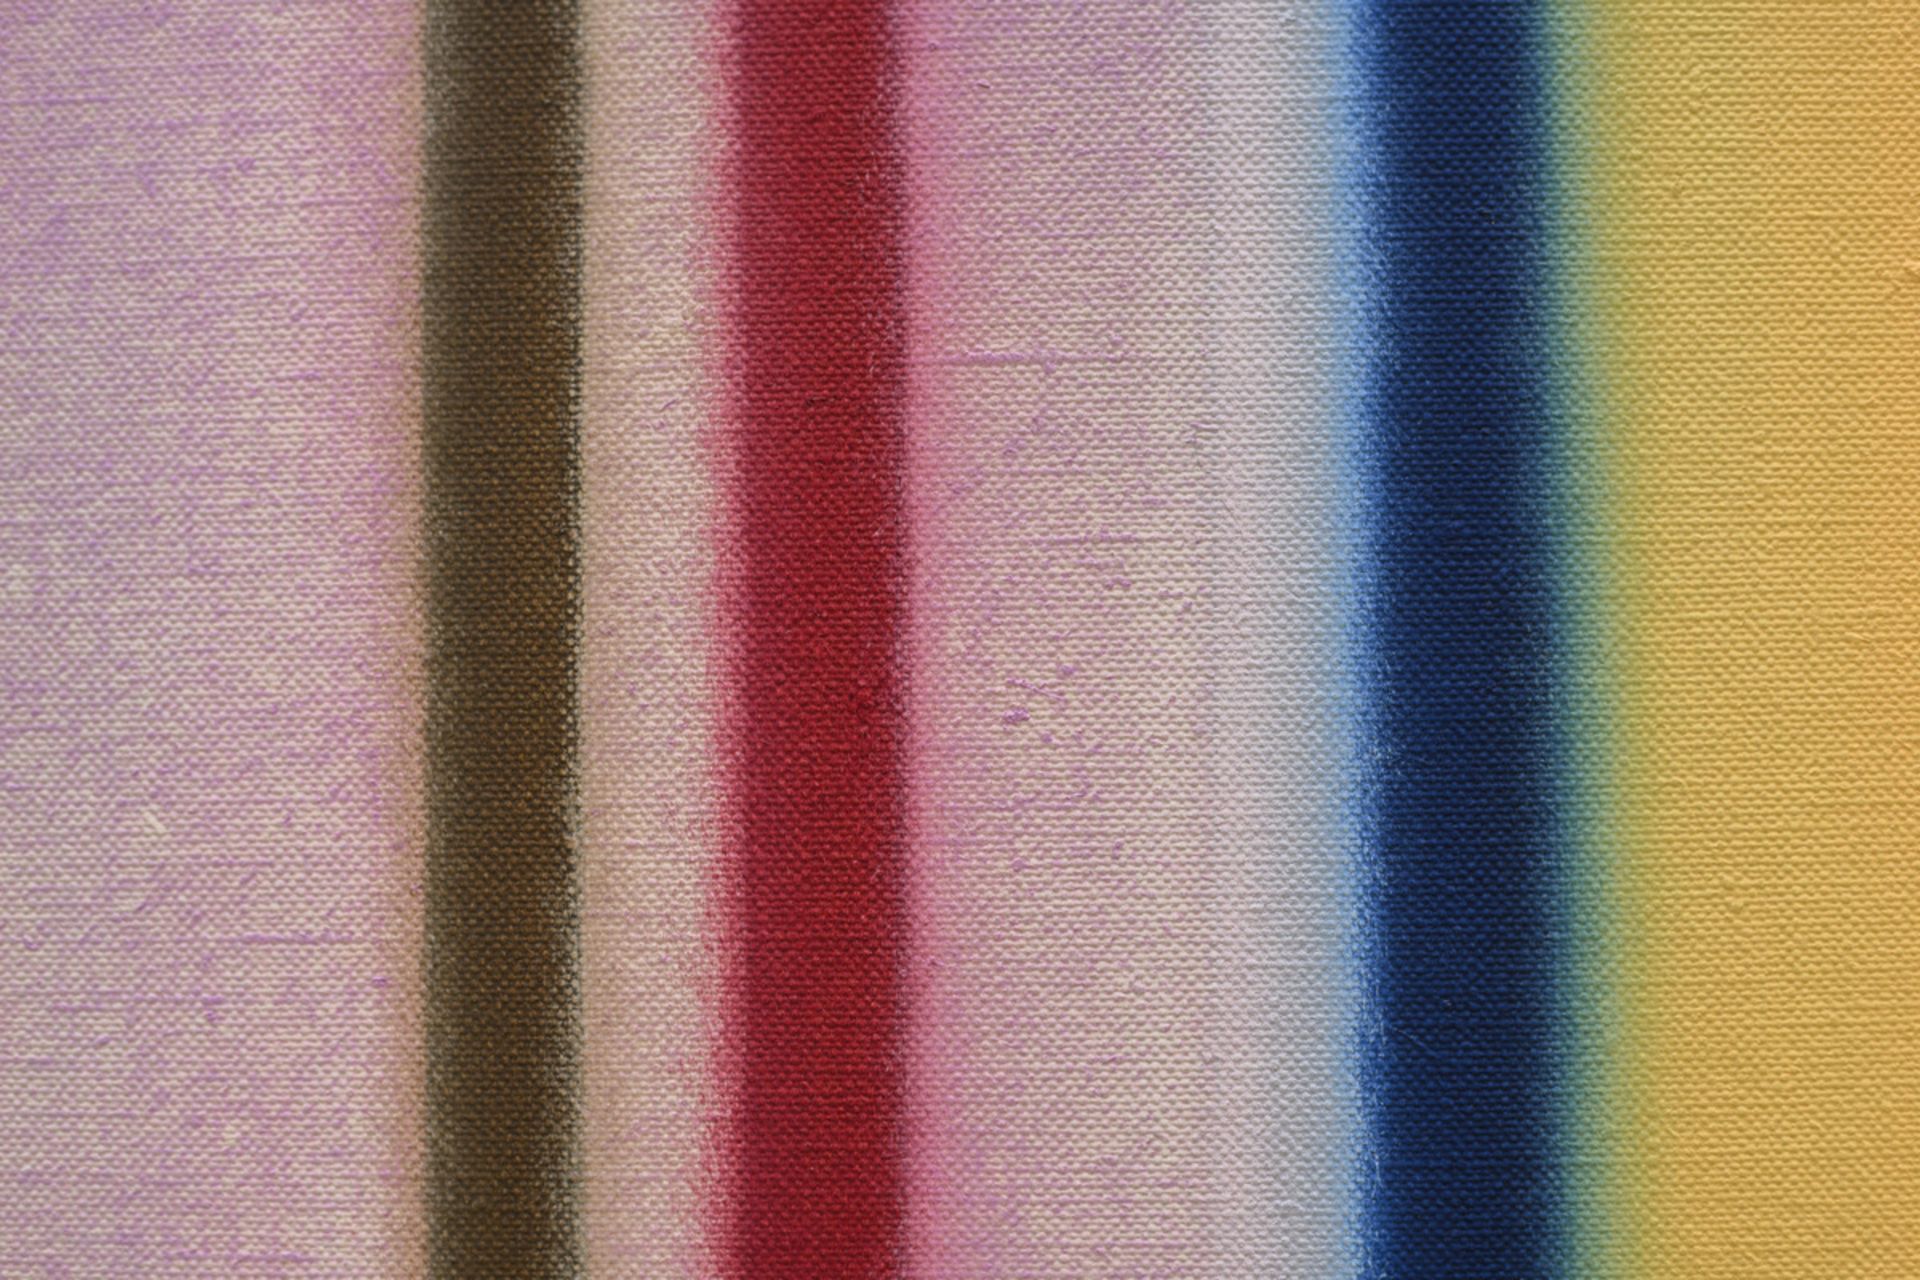 AndrÈ Beullens (1971): monumental painting (o/c) 'Modulus 4' (146x240cm) - Image 4 of 7